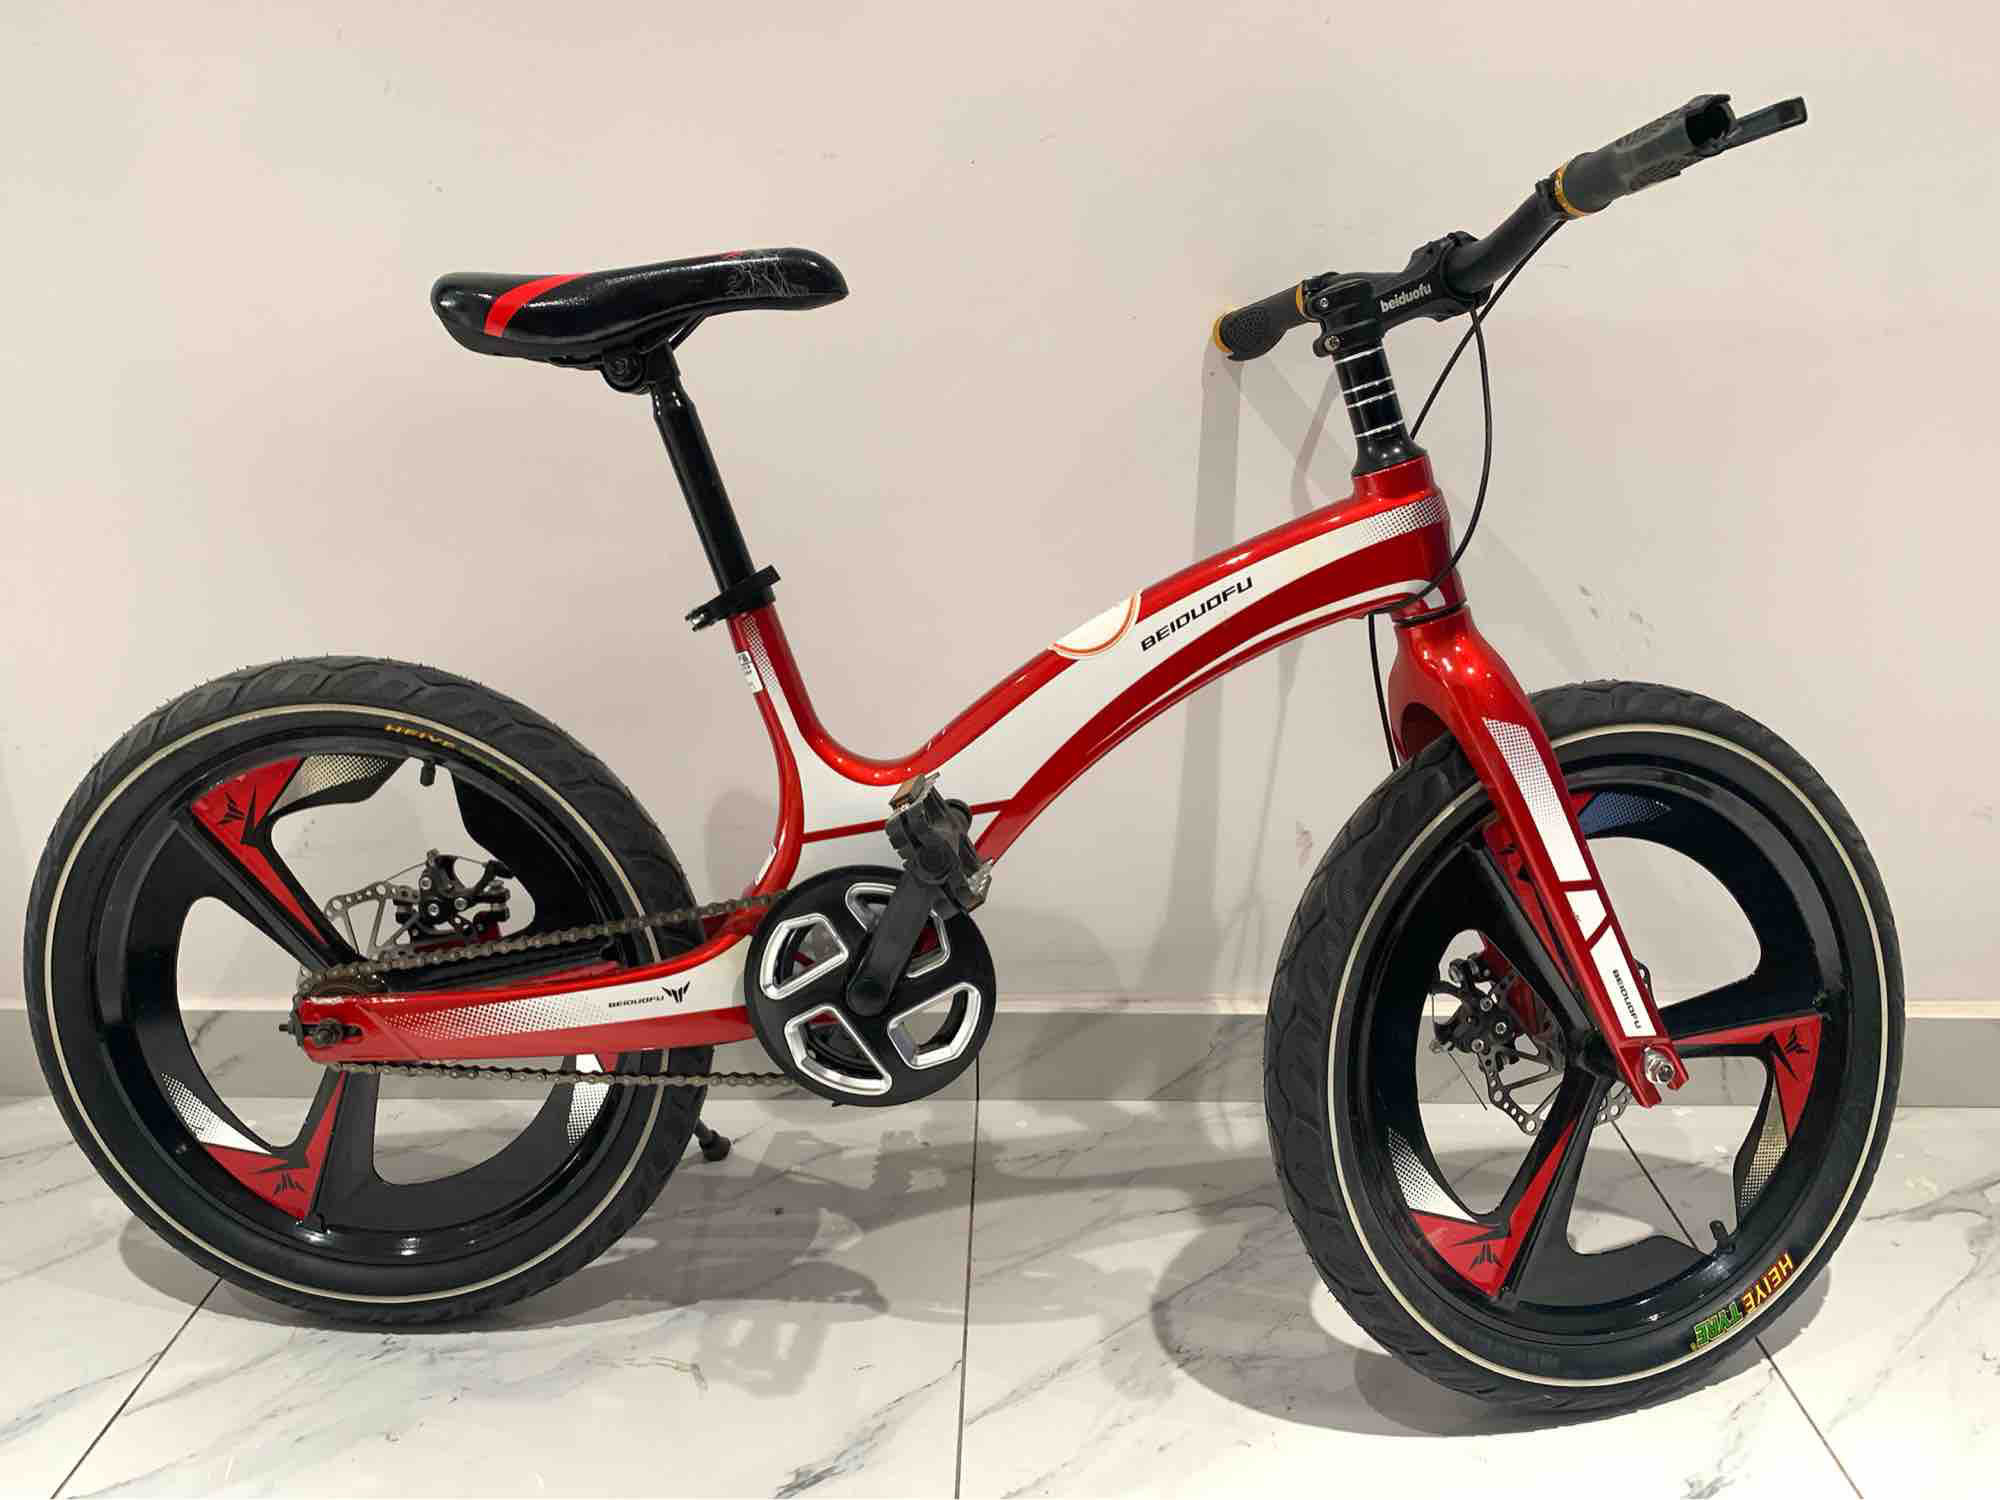 Top Reasons Why You Should Invest In Kids Bikes